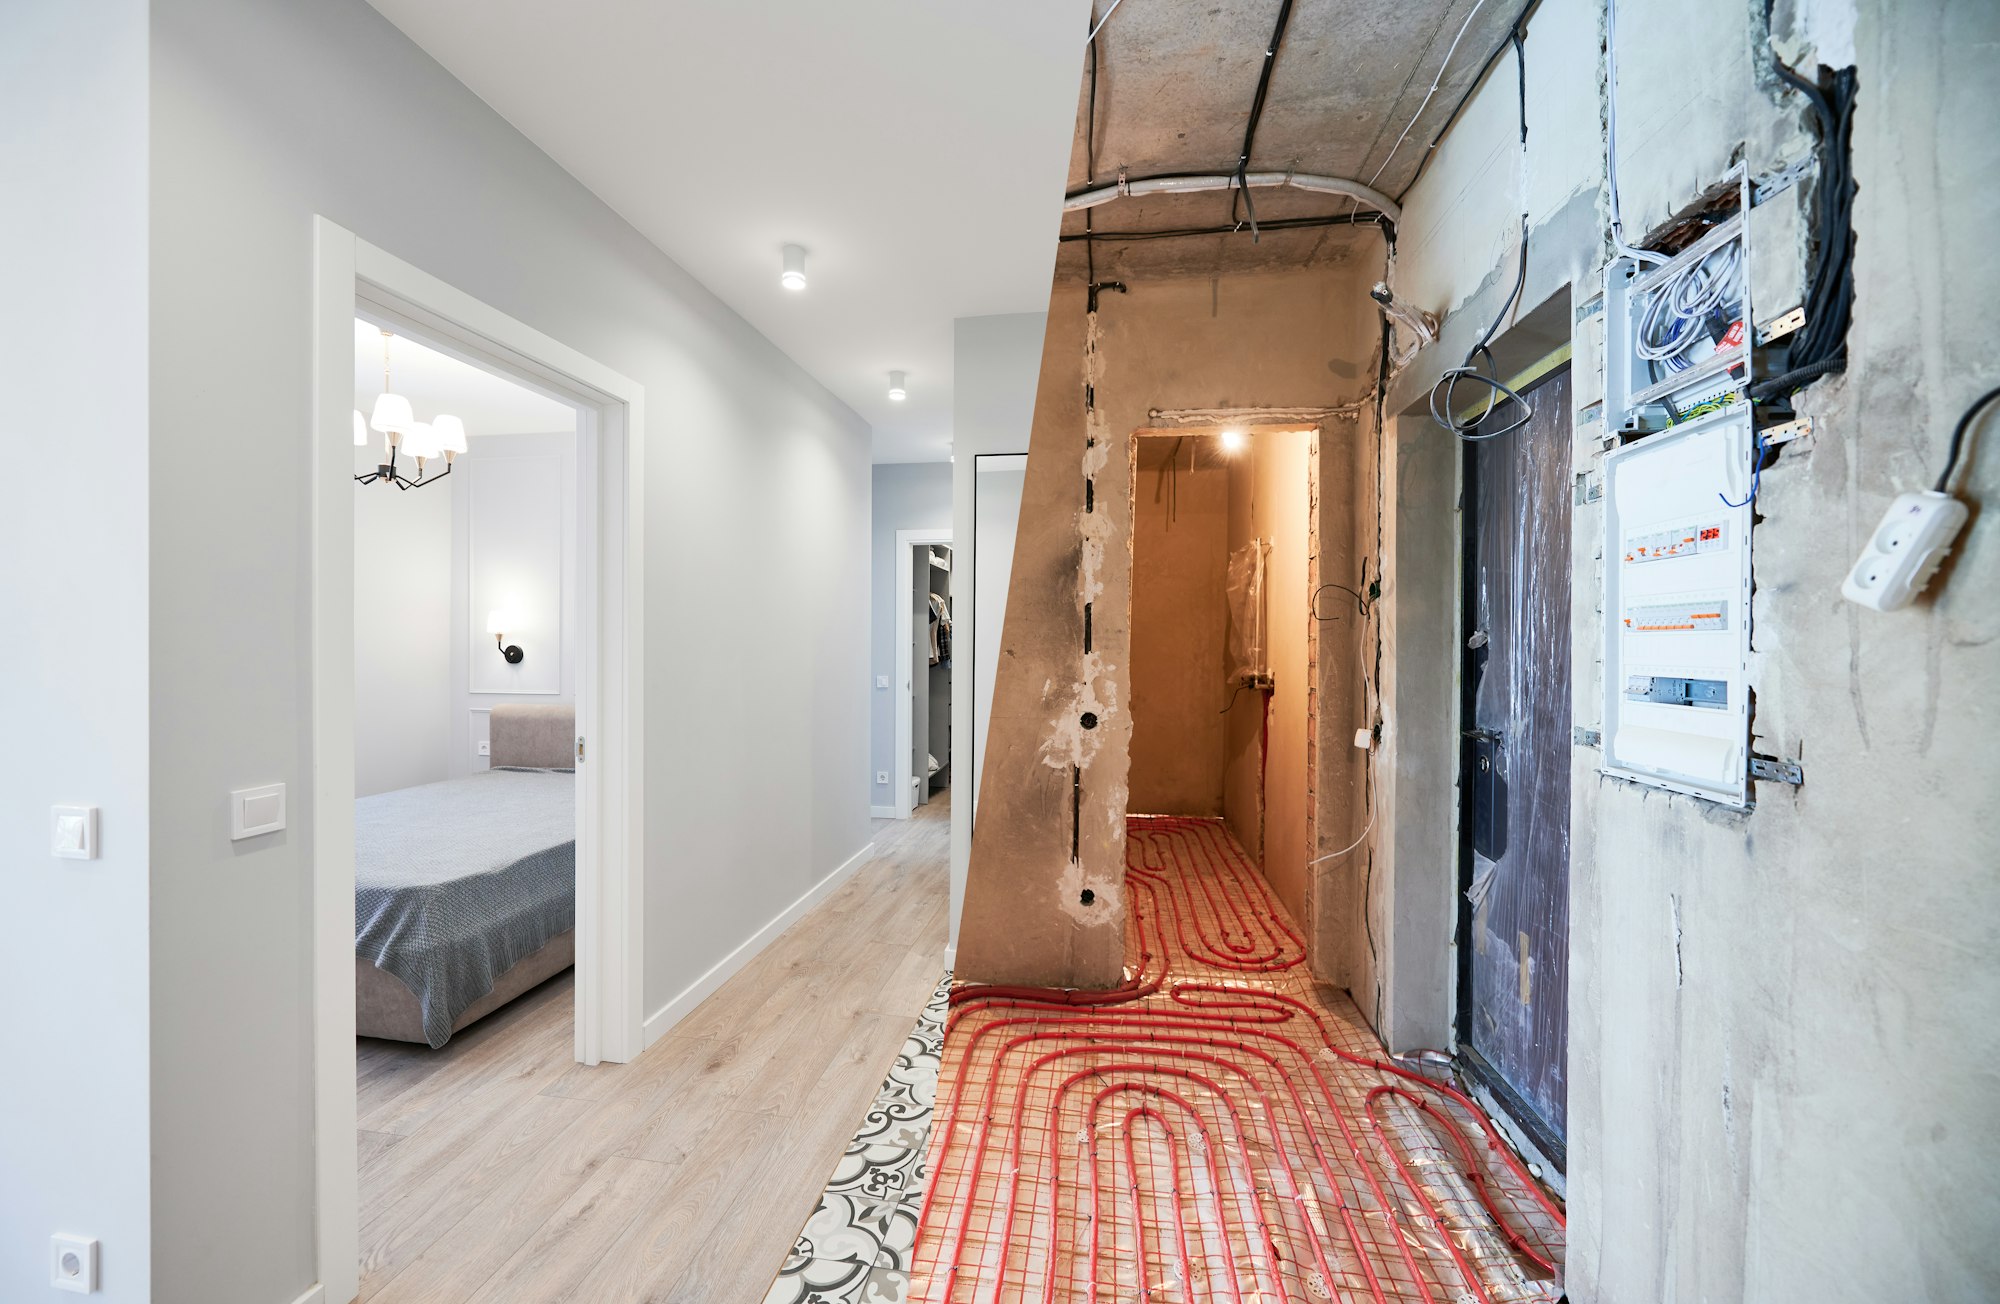 Apartment with doorways before and after renovation.